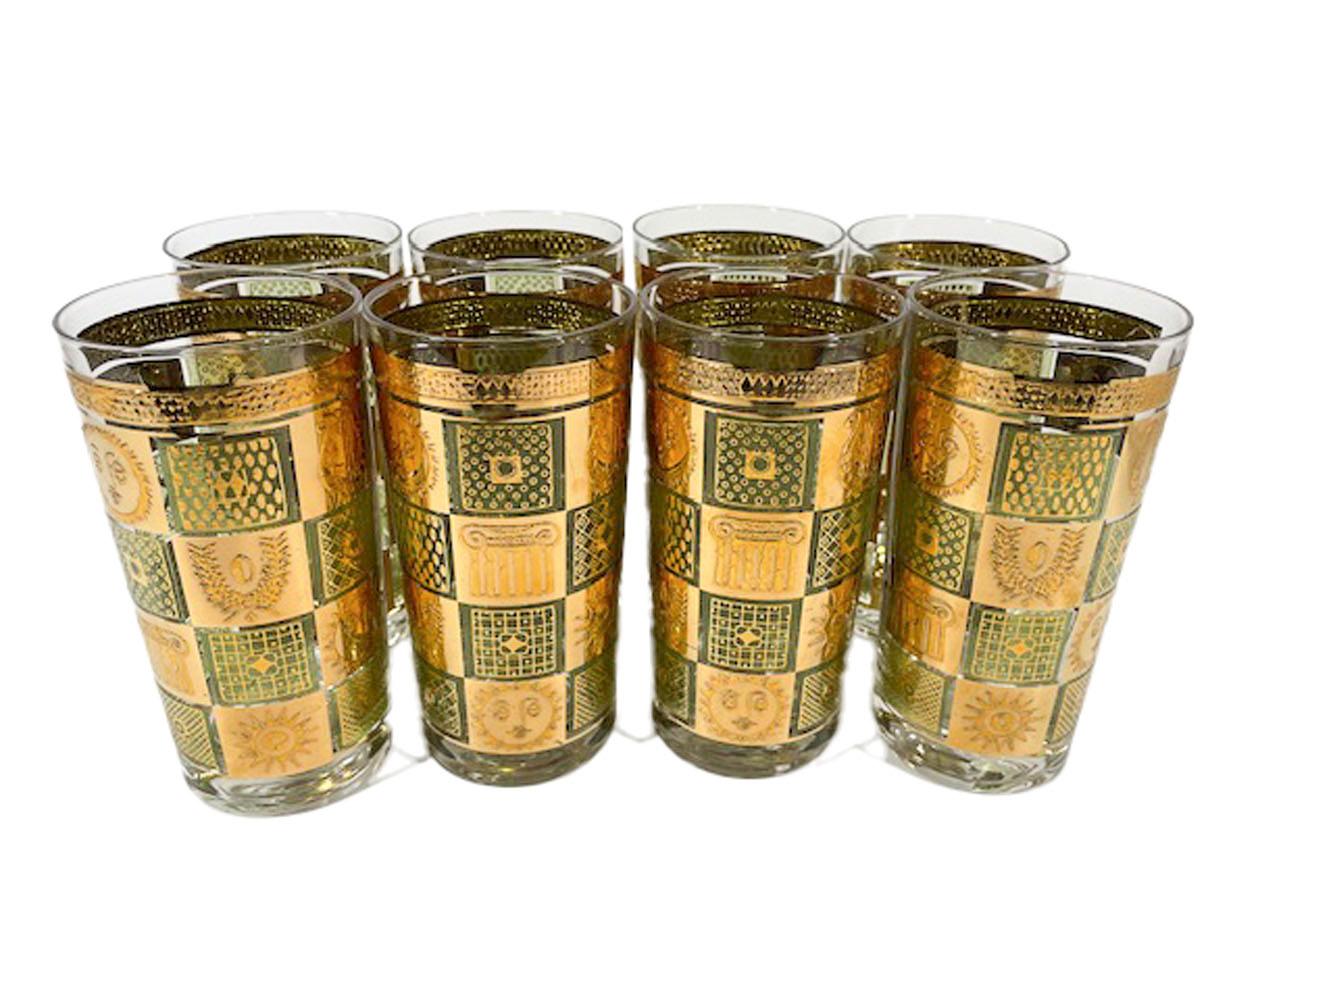 Set of eight vintage highball glasses designed by Georges Briard and having a 22 karat gold check pattern over translucent green enamel. Each square contains a classical motif including suns with faces, column capitals and lyres together with other